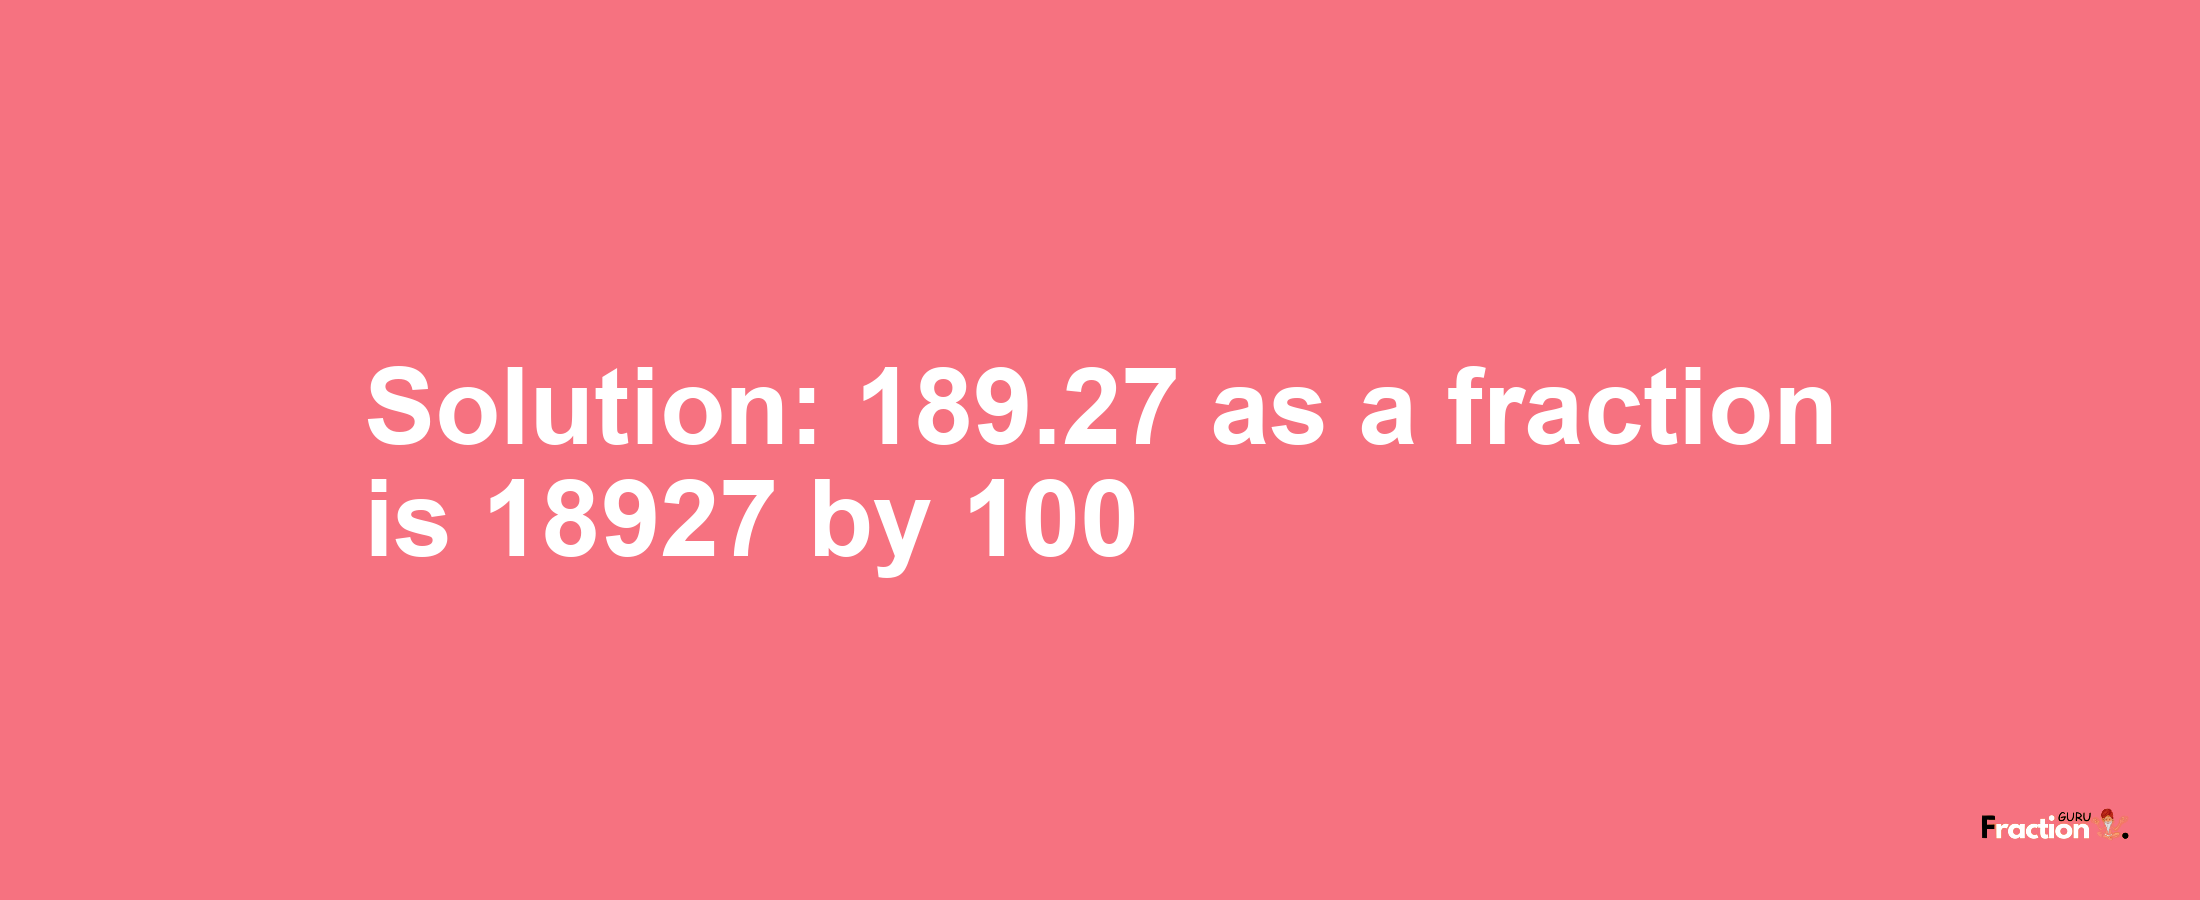 Solution:189.27 as a fraction is 18927/100